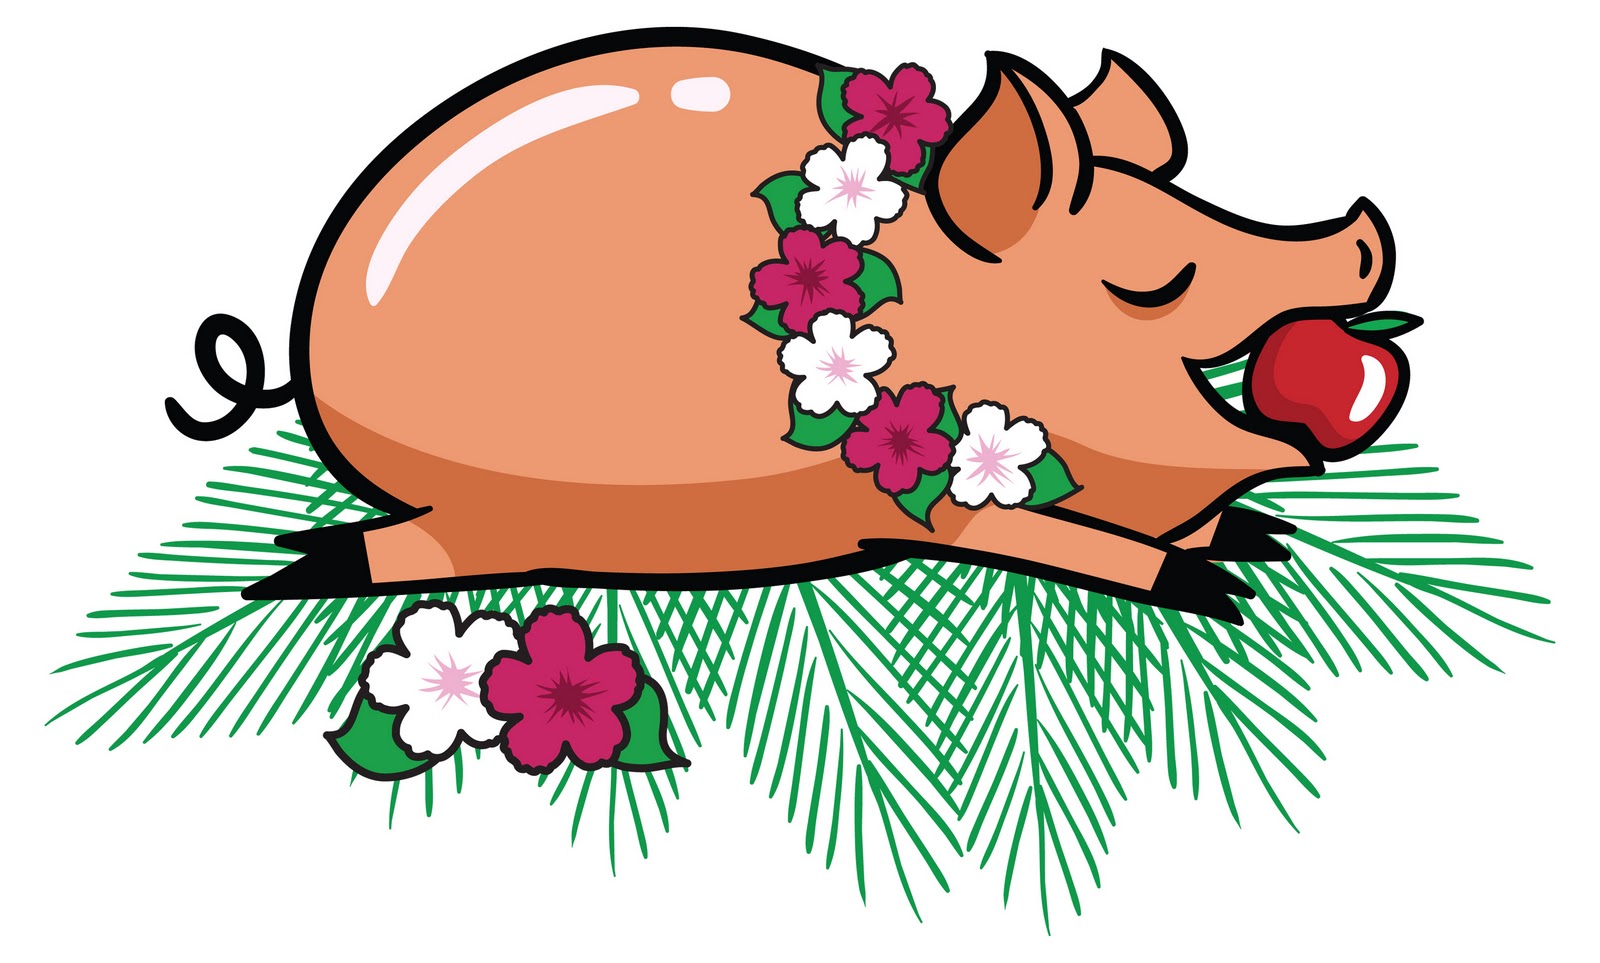 55 Images Of Pig Roast Clip Art   You Can Use These Free Cliparts For